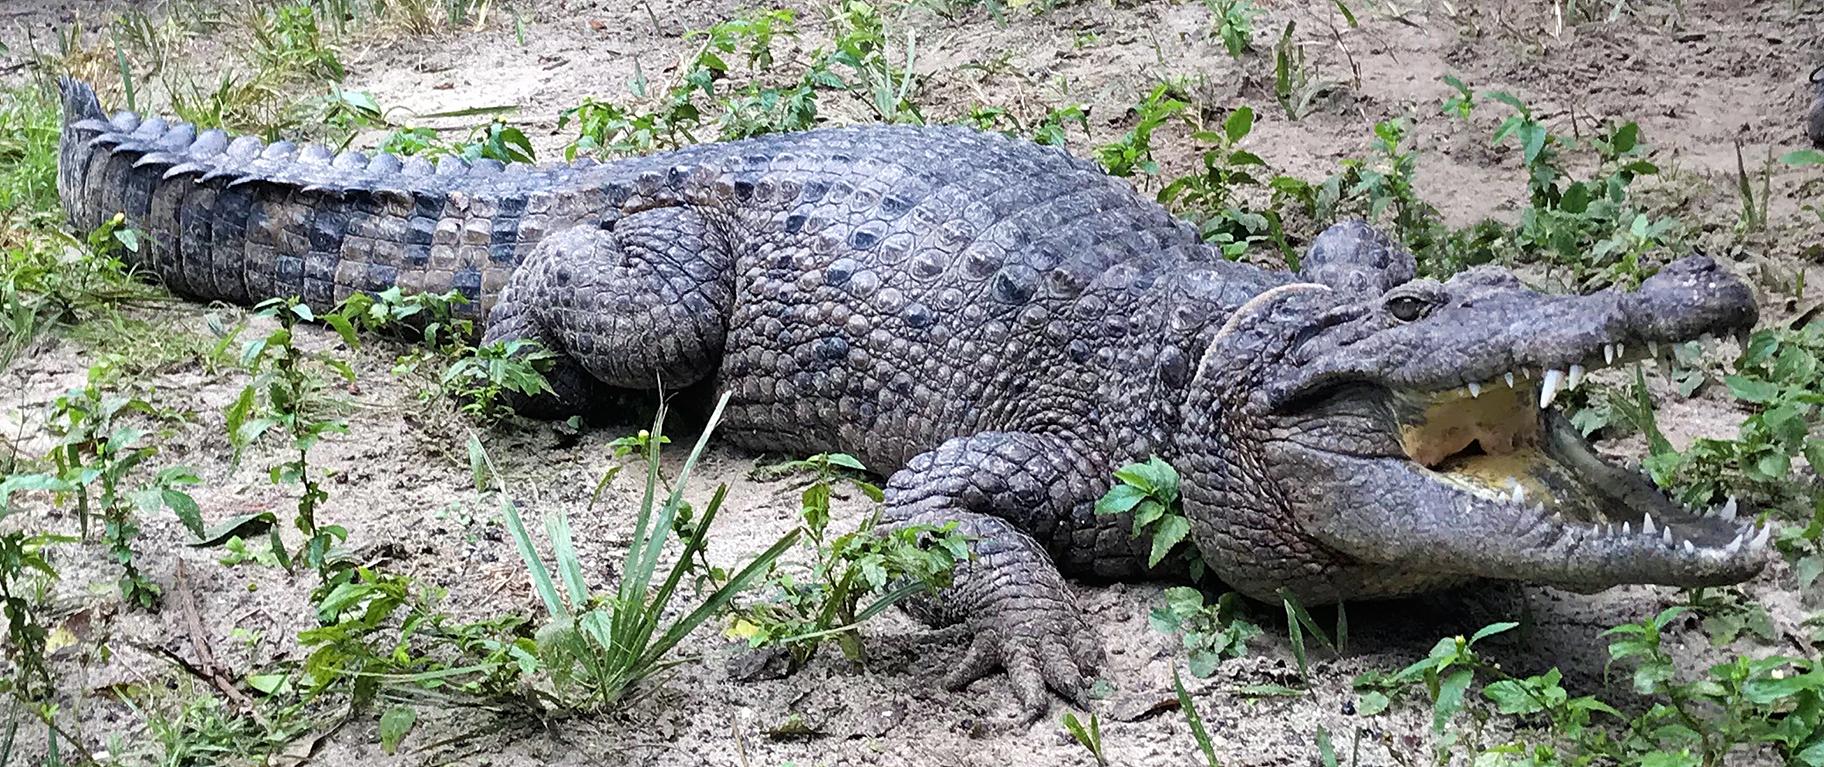  The crocodile observed by Field Museum scientist Caleb McMahan at an alligator farm in Florida. (Courtesy The Field Museum) 